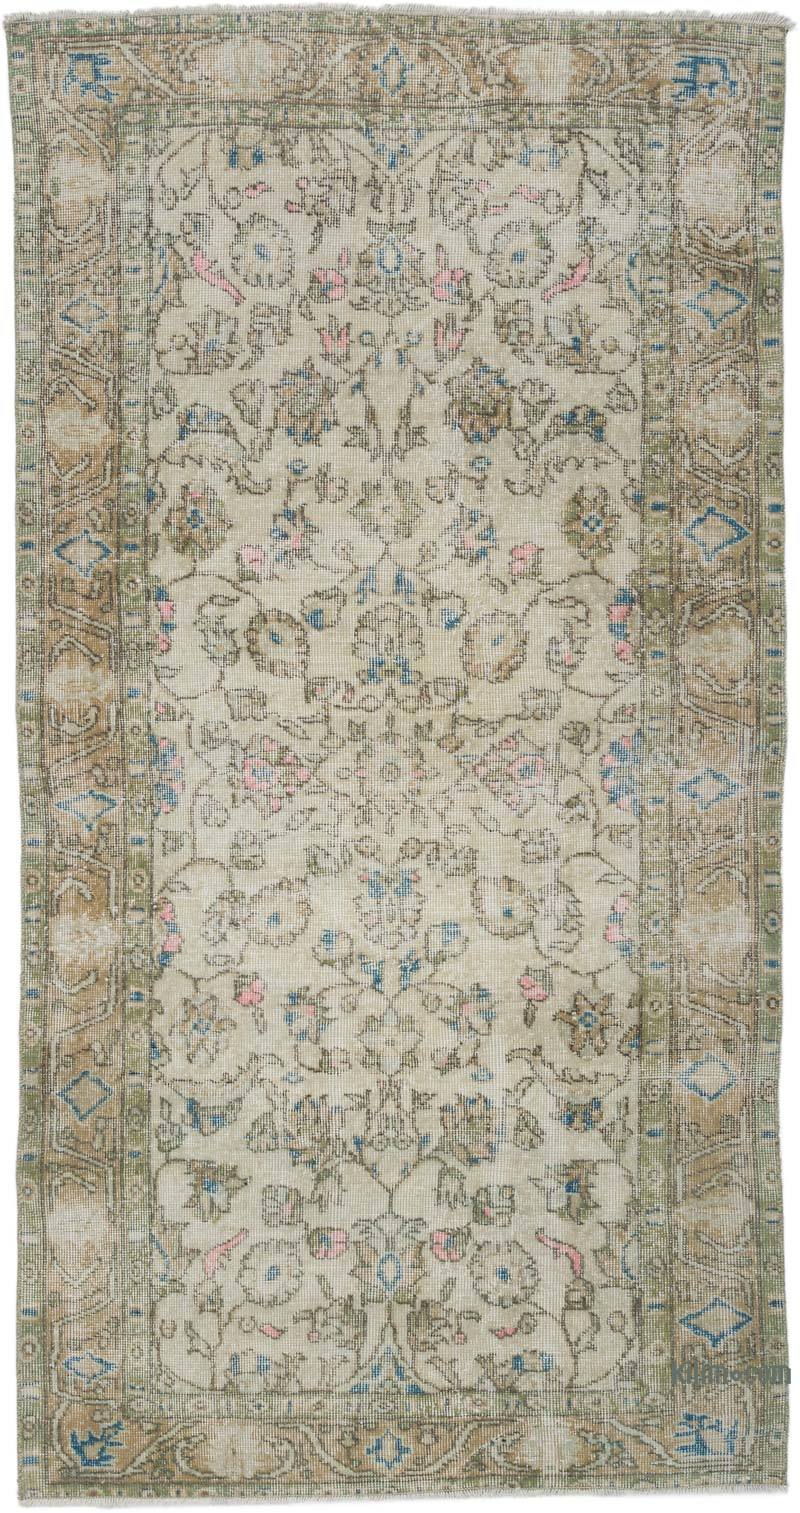 Vintage Turkish Hand-Knotted Rug - 3' 7" x 6' 10" (43 in. x 82 in.) - K0066326